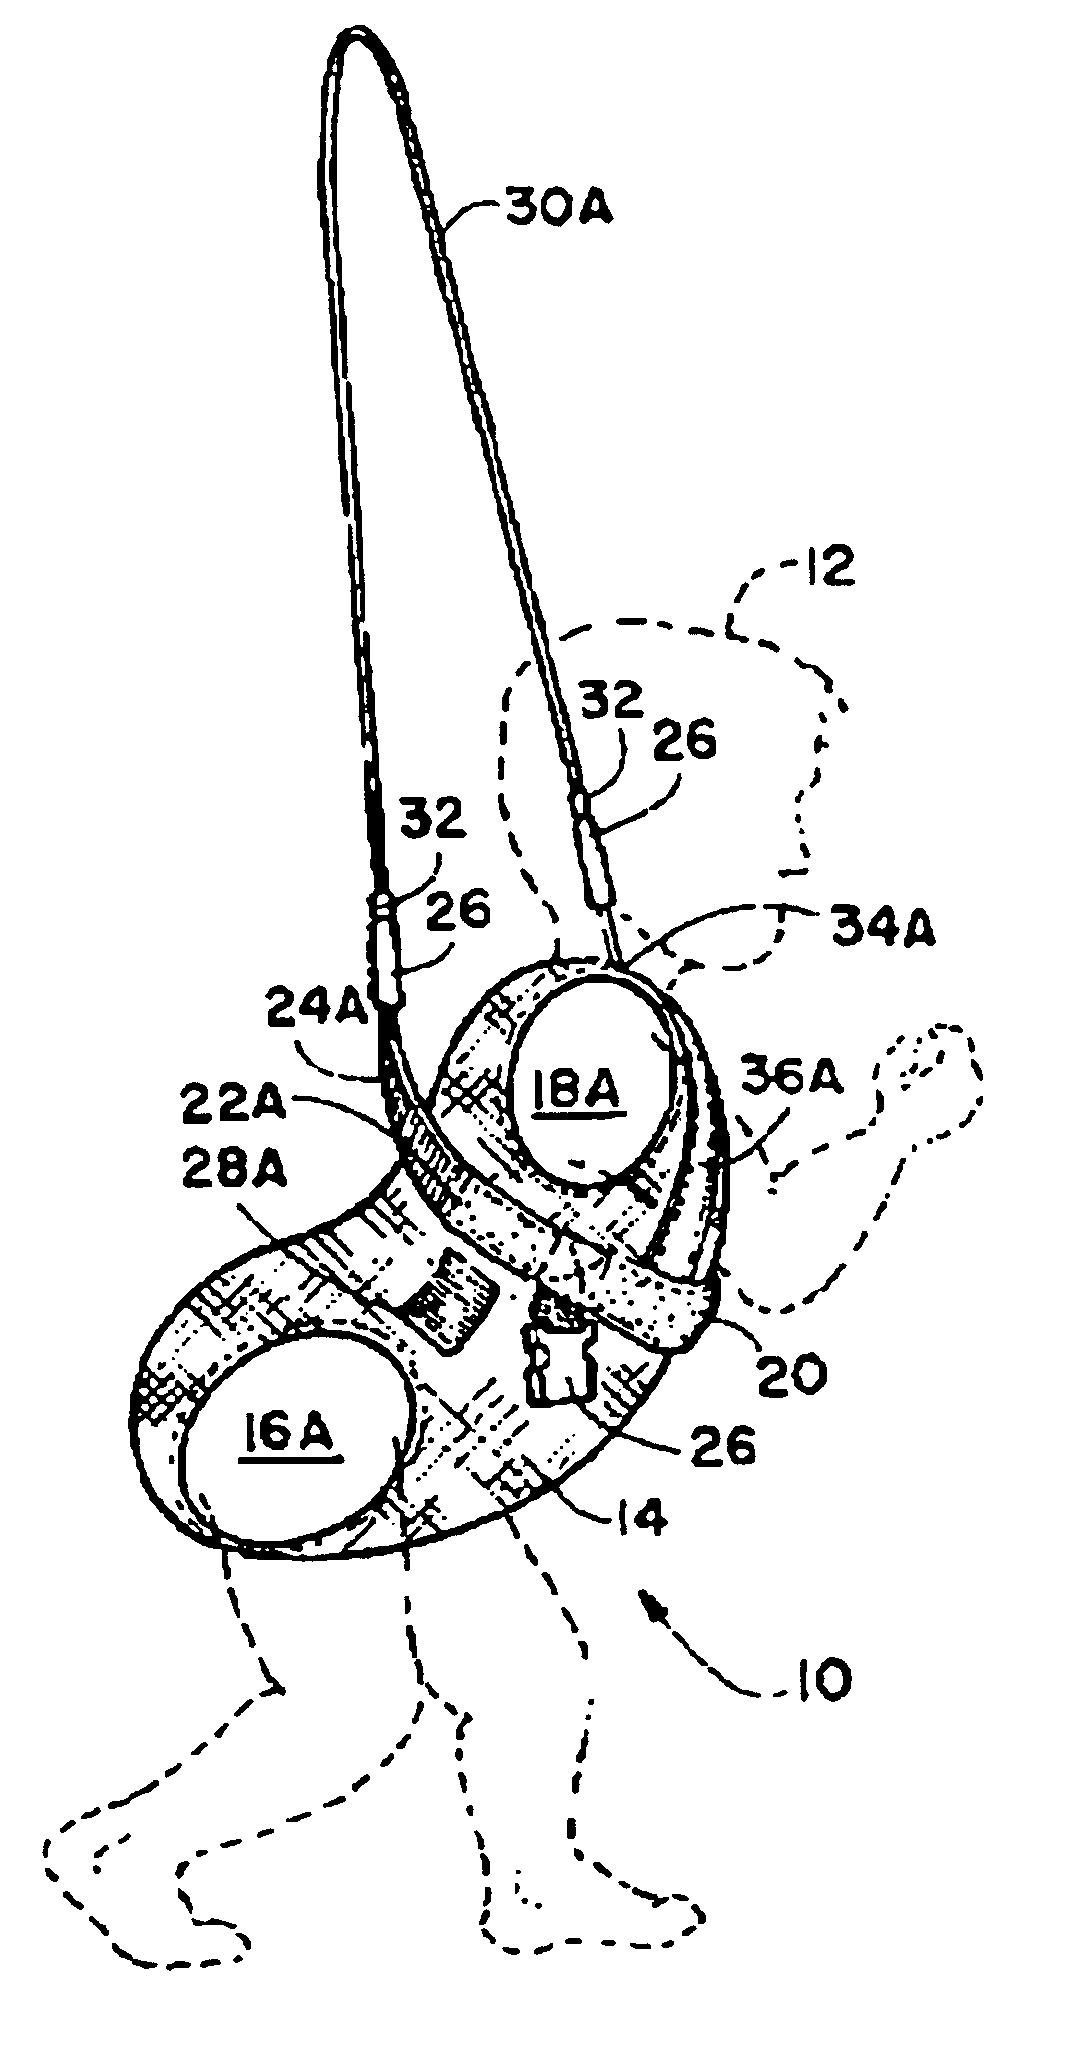 Infant walking trainer and carrier garment